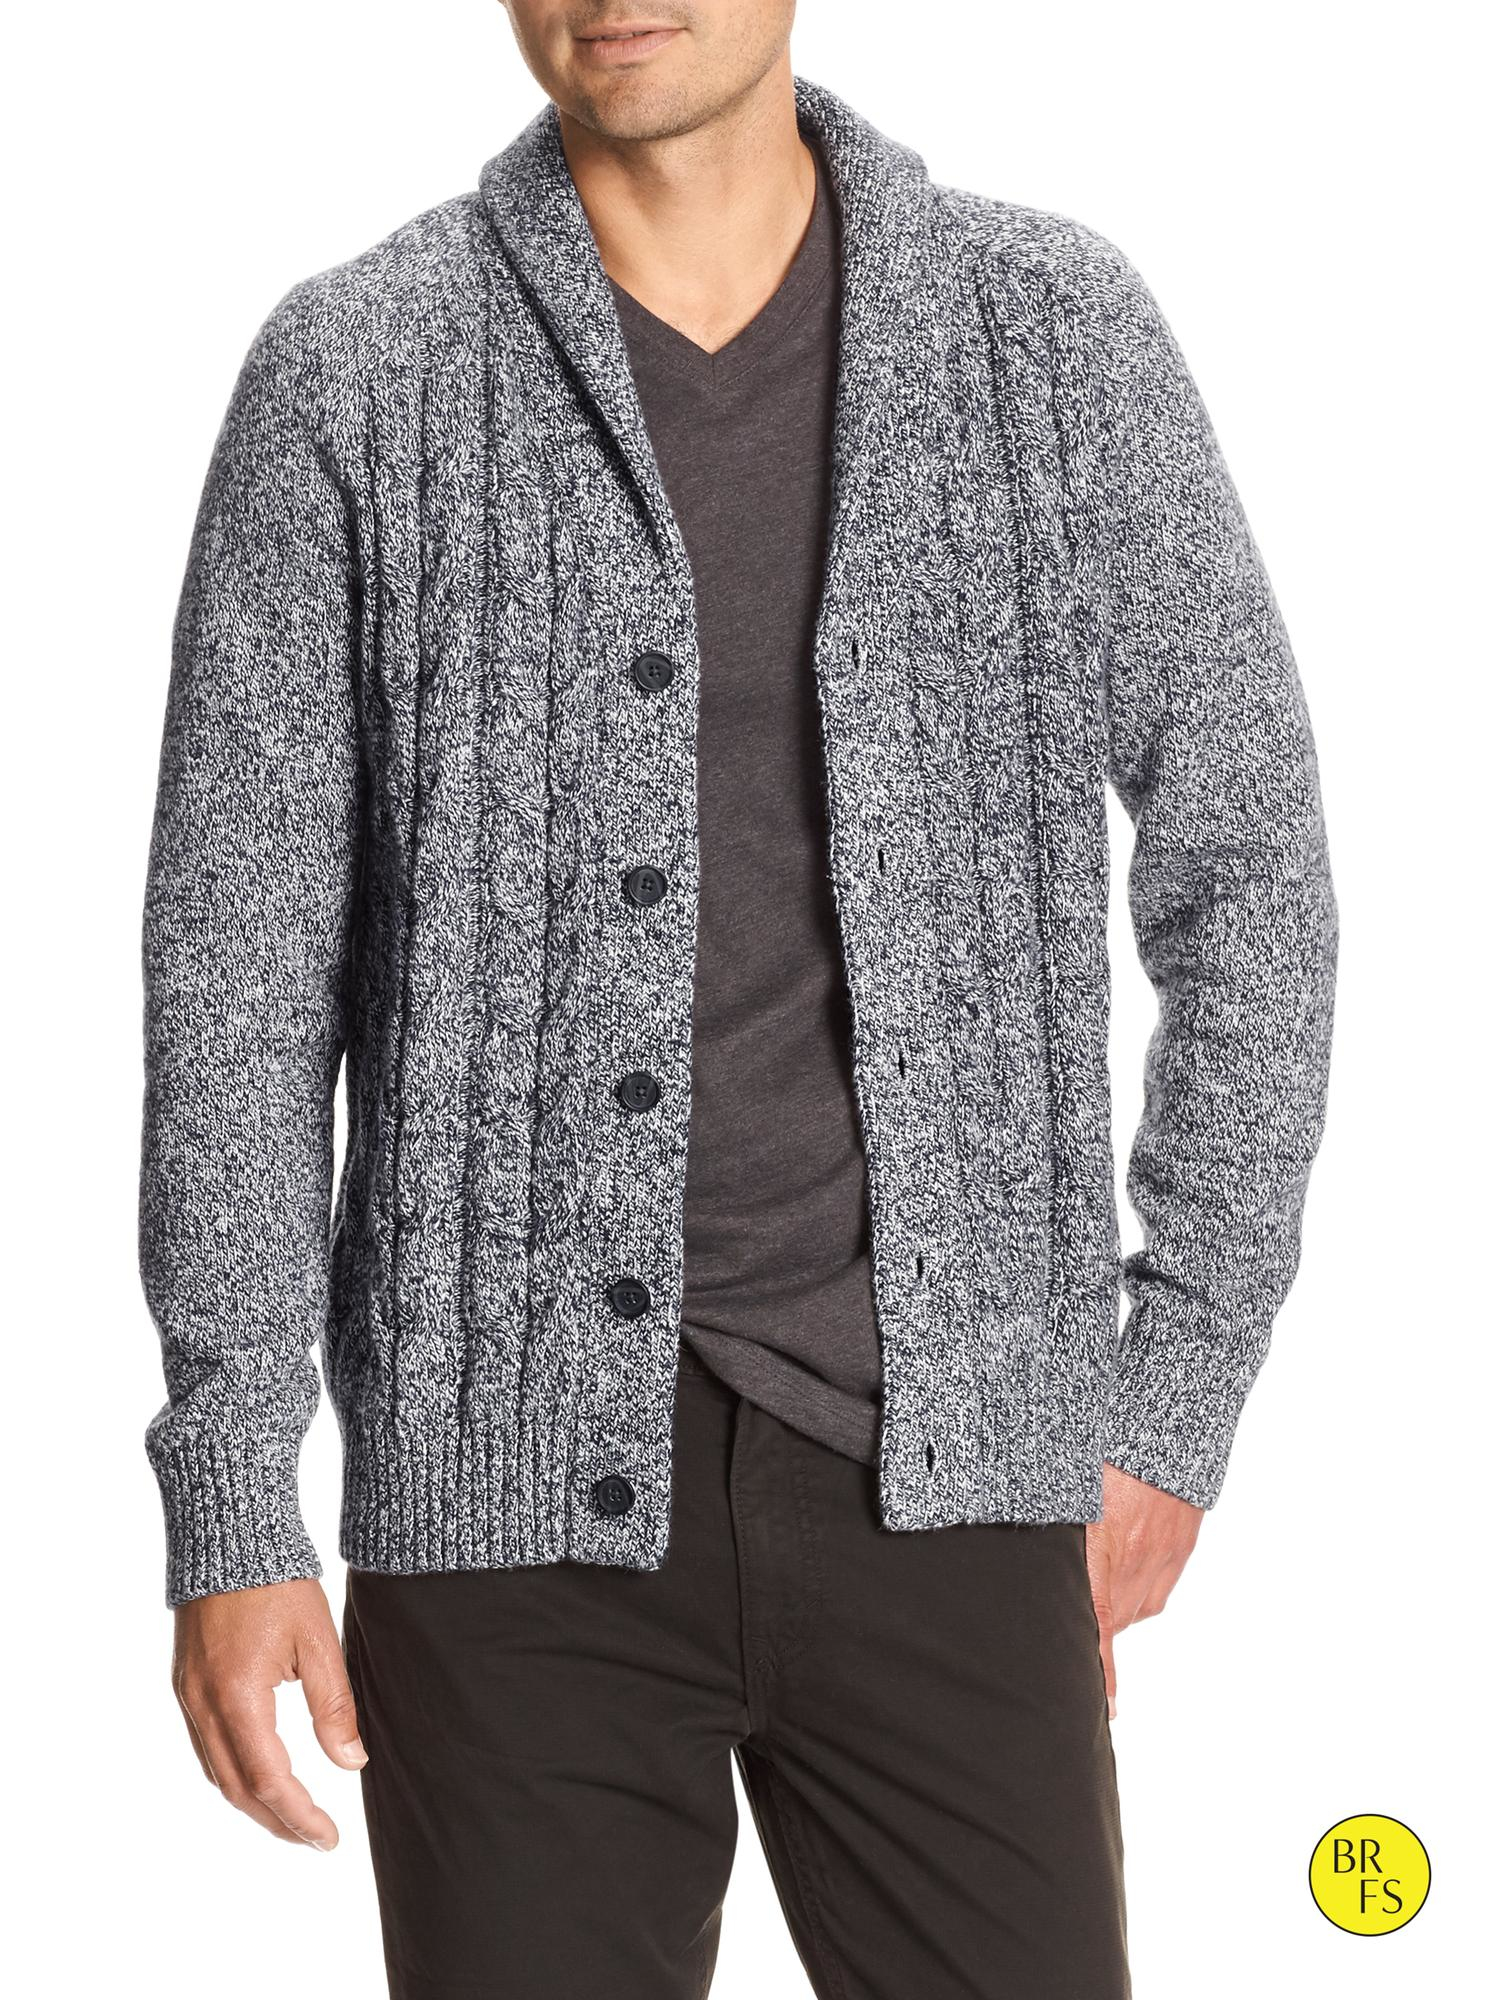 Lyst - Banana Republic Factory Cable-knit Cardigan in Gray for Men